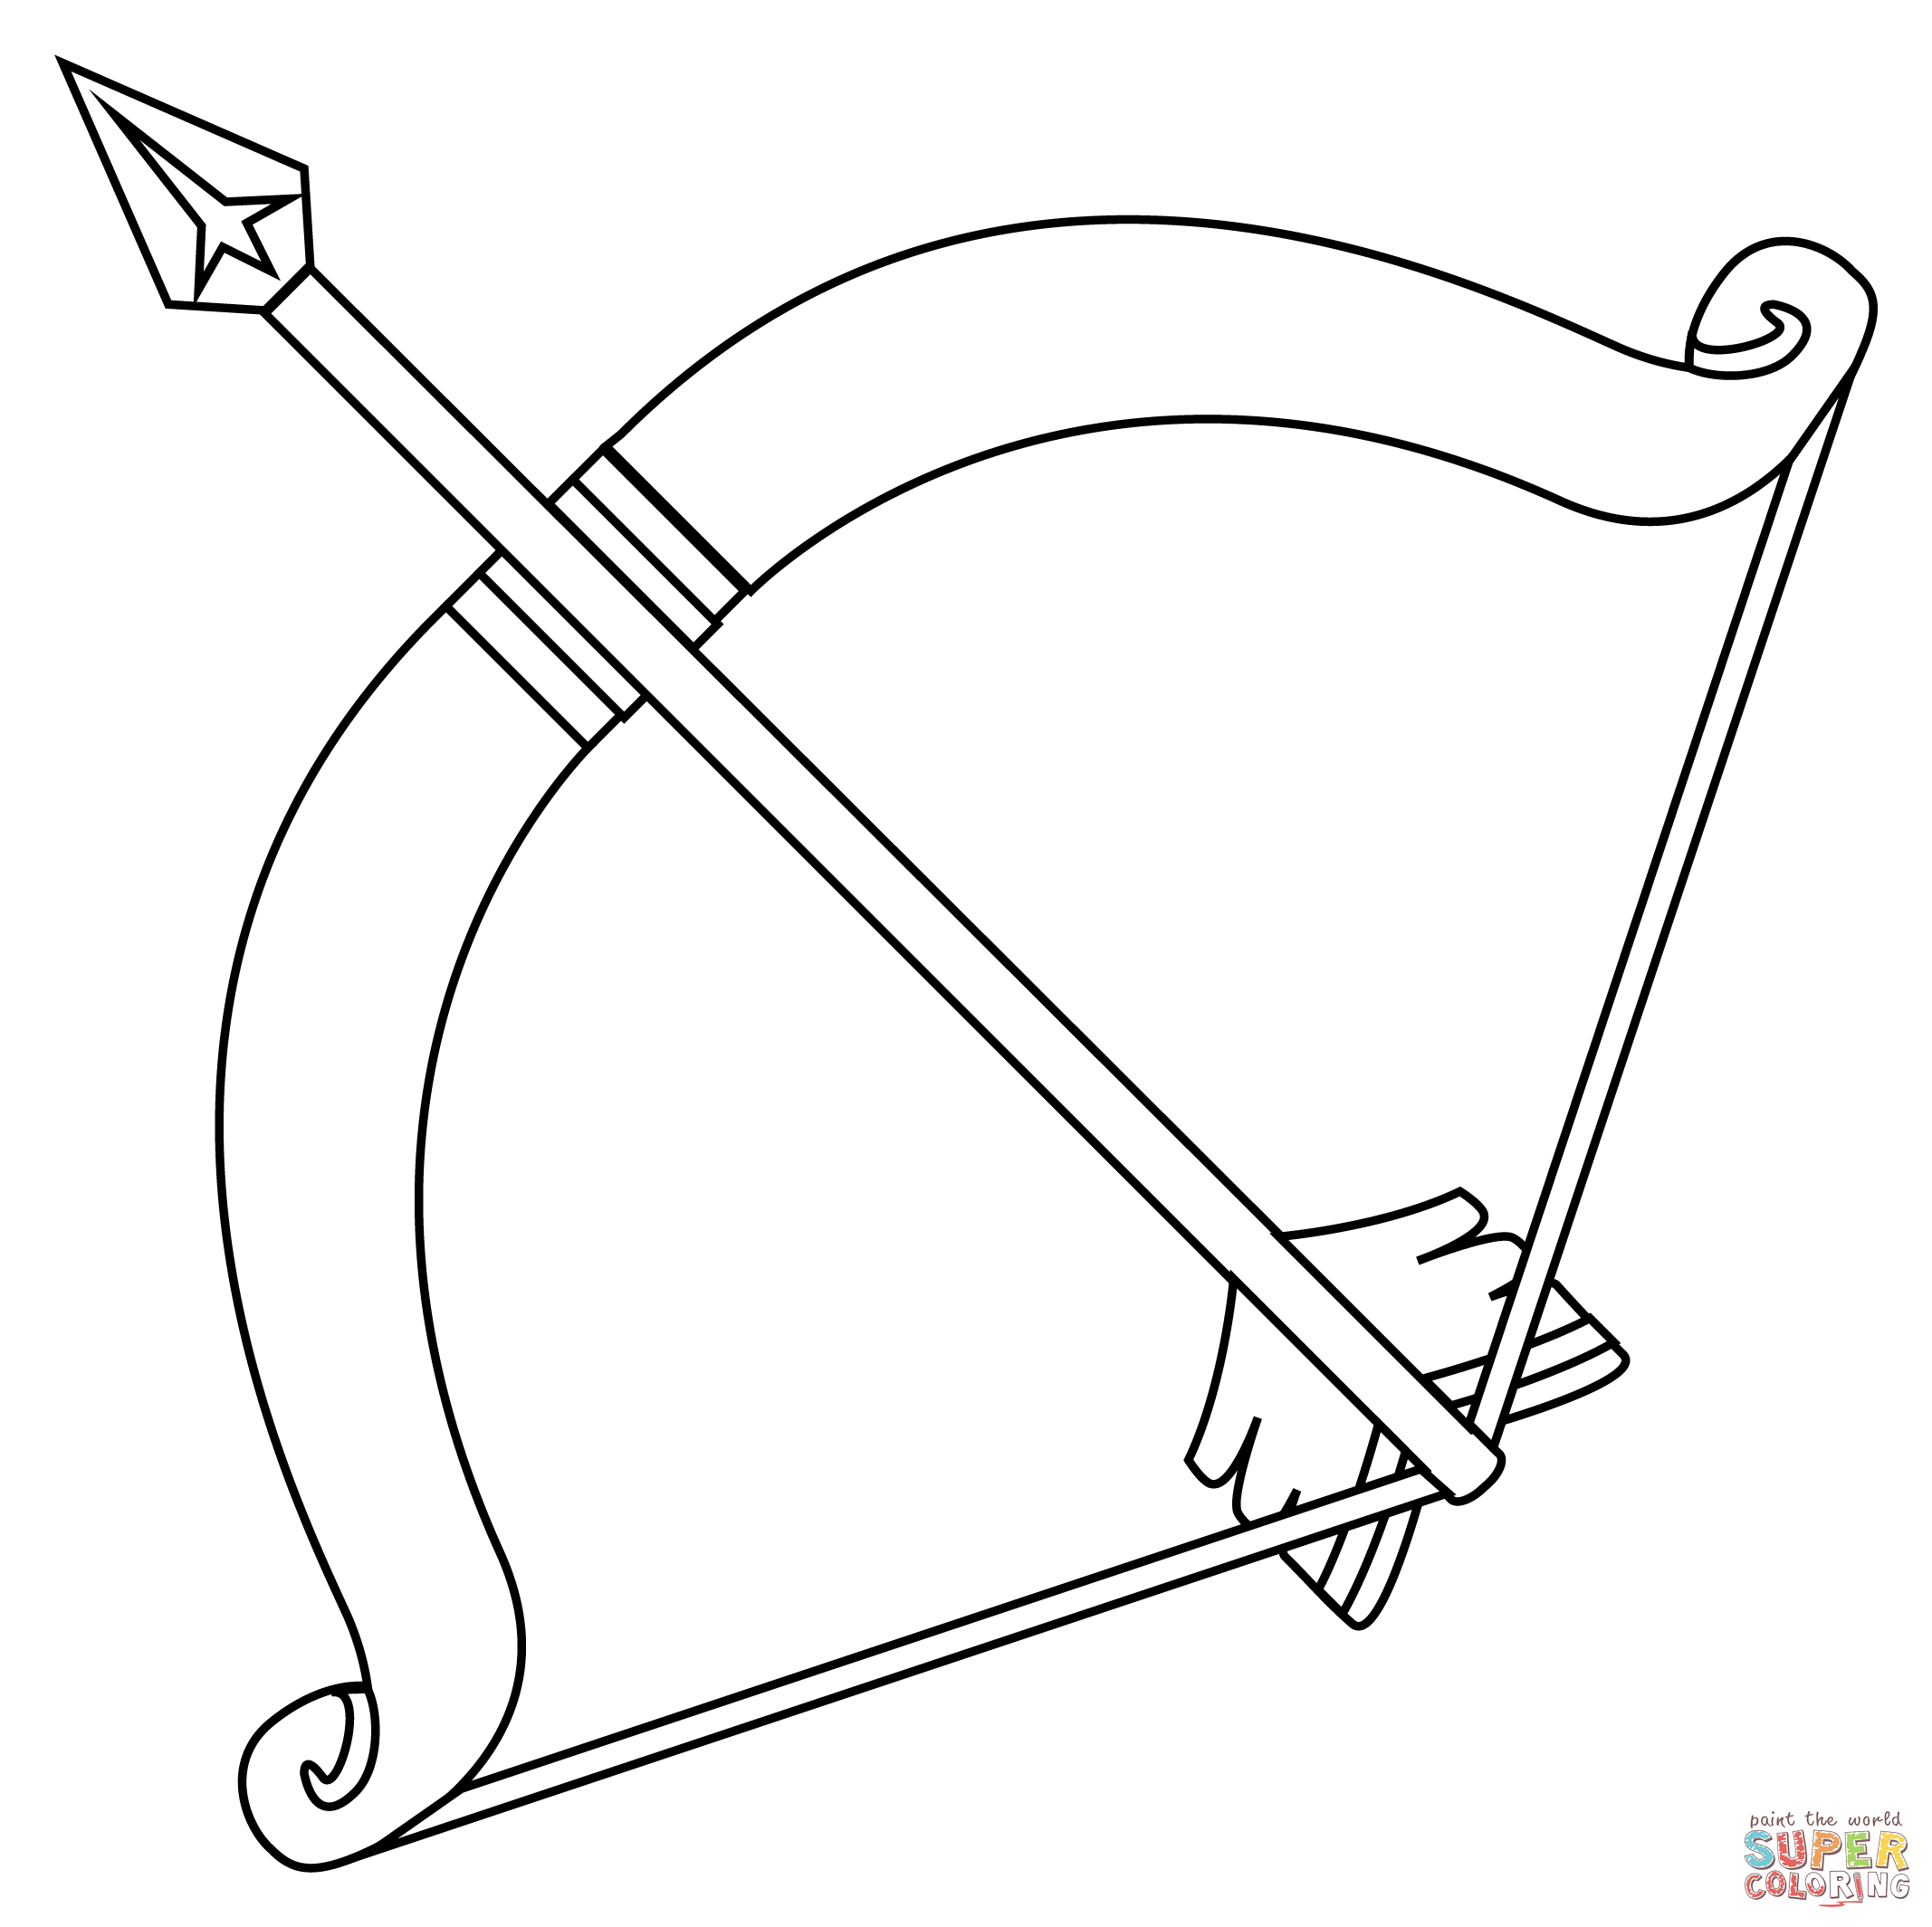 Bow and Arrow coloring page | Free Printable Coloring Pages